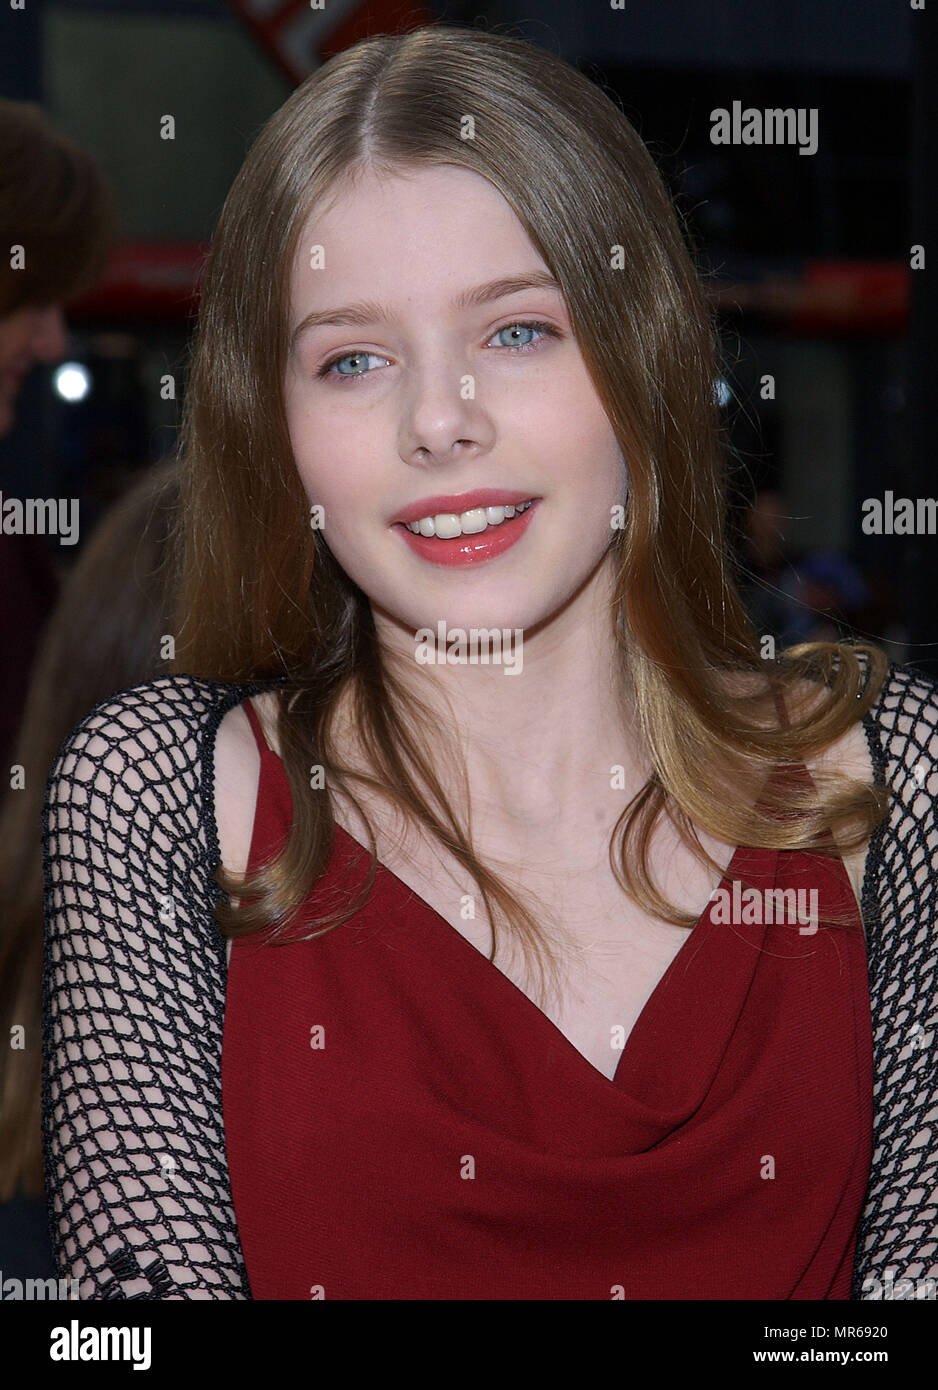 Rachel Hurd-Wood arriving at the " Peter Pan Premiere " at the Chinese Theatre in Los Angeles. December 13, 2003. Hurd-WoodRachel041 Red Carpet Event, Vertical, USA, Film Industry, Celebrities,  Photography, Bestof, Arts Culture and Entertainment, Topix Celebrities fashion /  Vertical, Best of, Event in Hollywood Life - California,  Red Carpet and backstage, USA, Film Industry, Celebrities,  movie celebrities, TV celebrities, Music celebrities, Photography, Bestof, Arts Culture and Entertainment,  Topix, headshot, vertical, one person,, from the year , 2003, inquiry tsuni@Gamma-USA.com Stock Photo